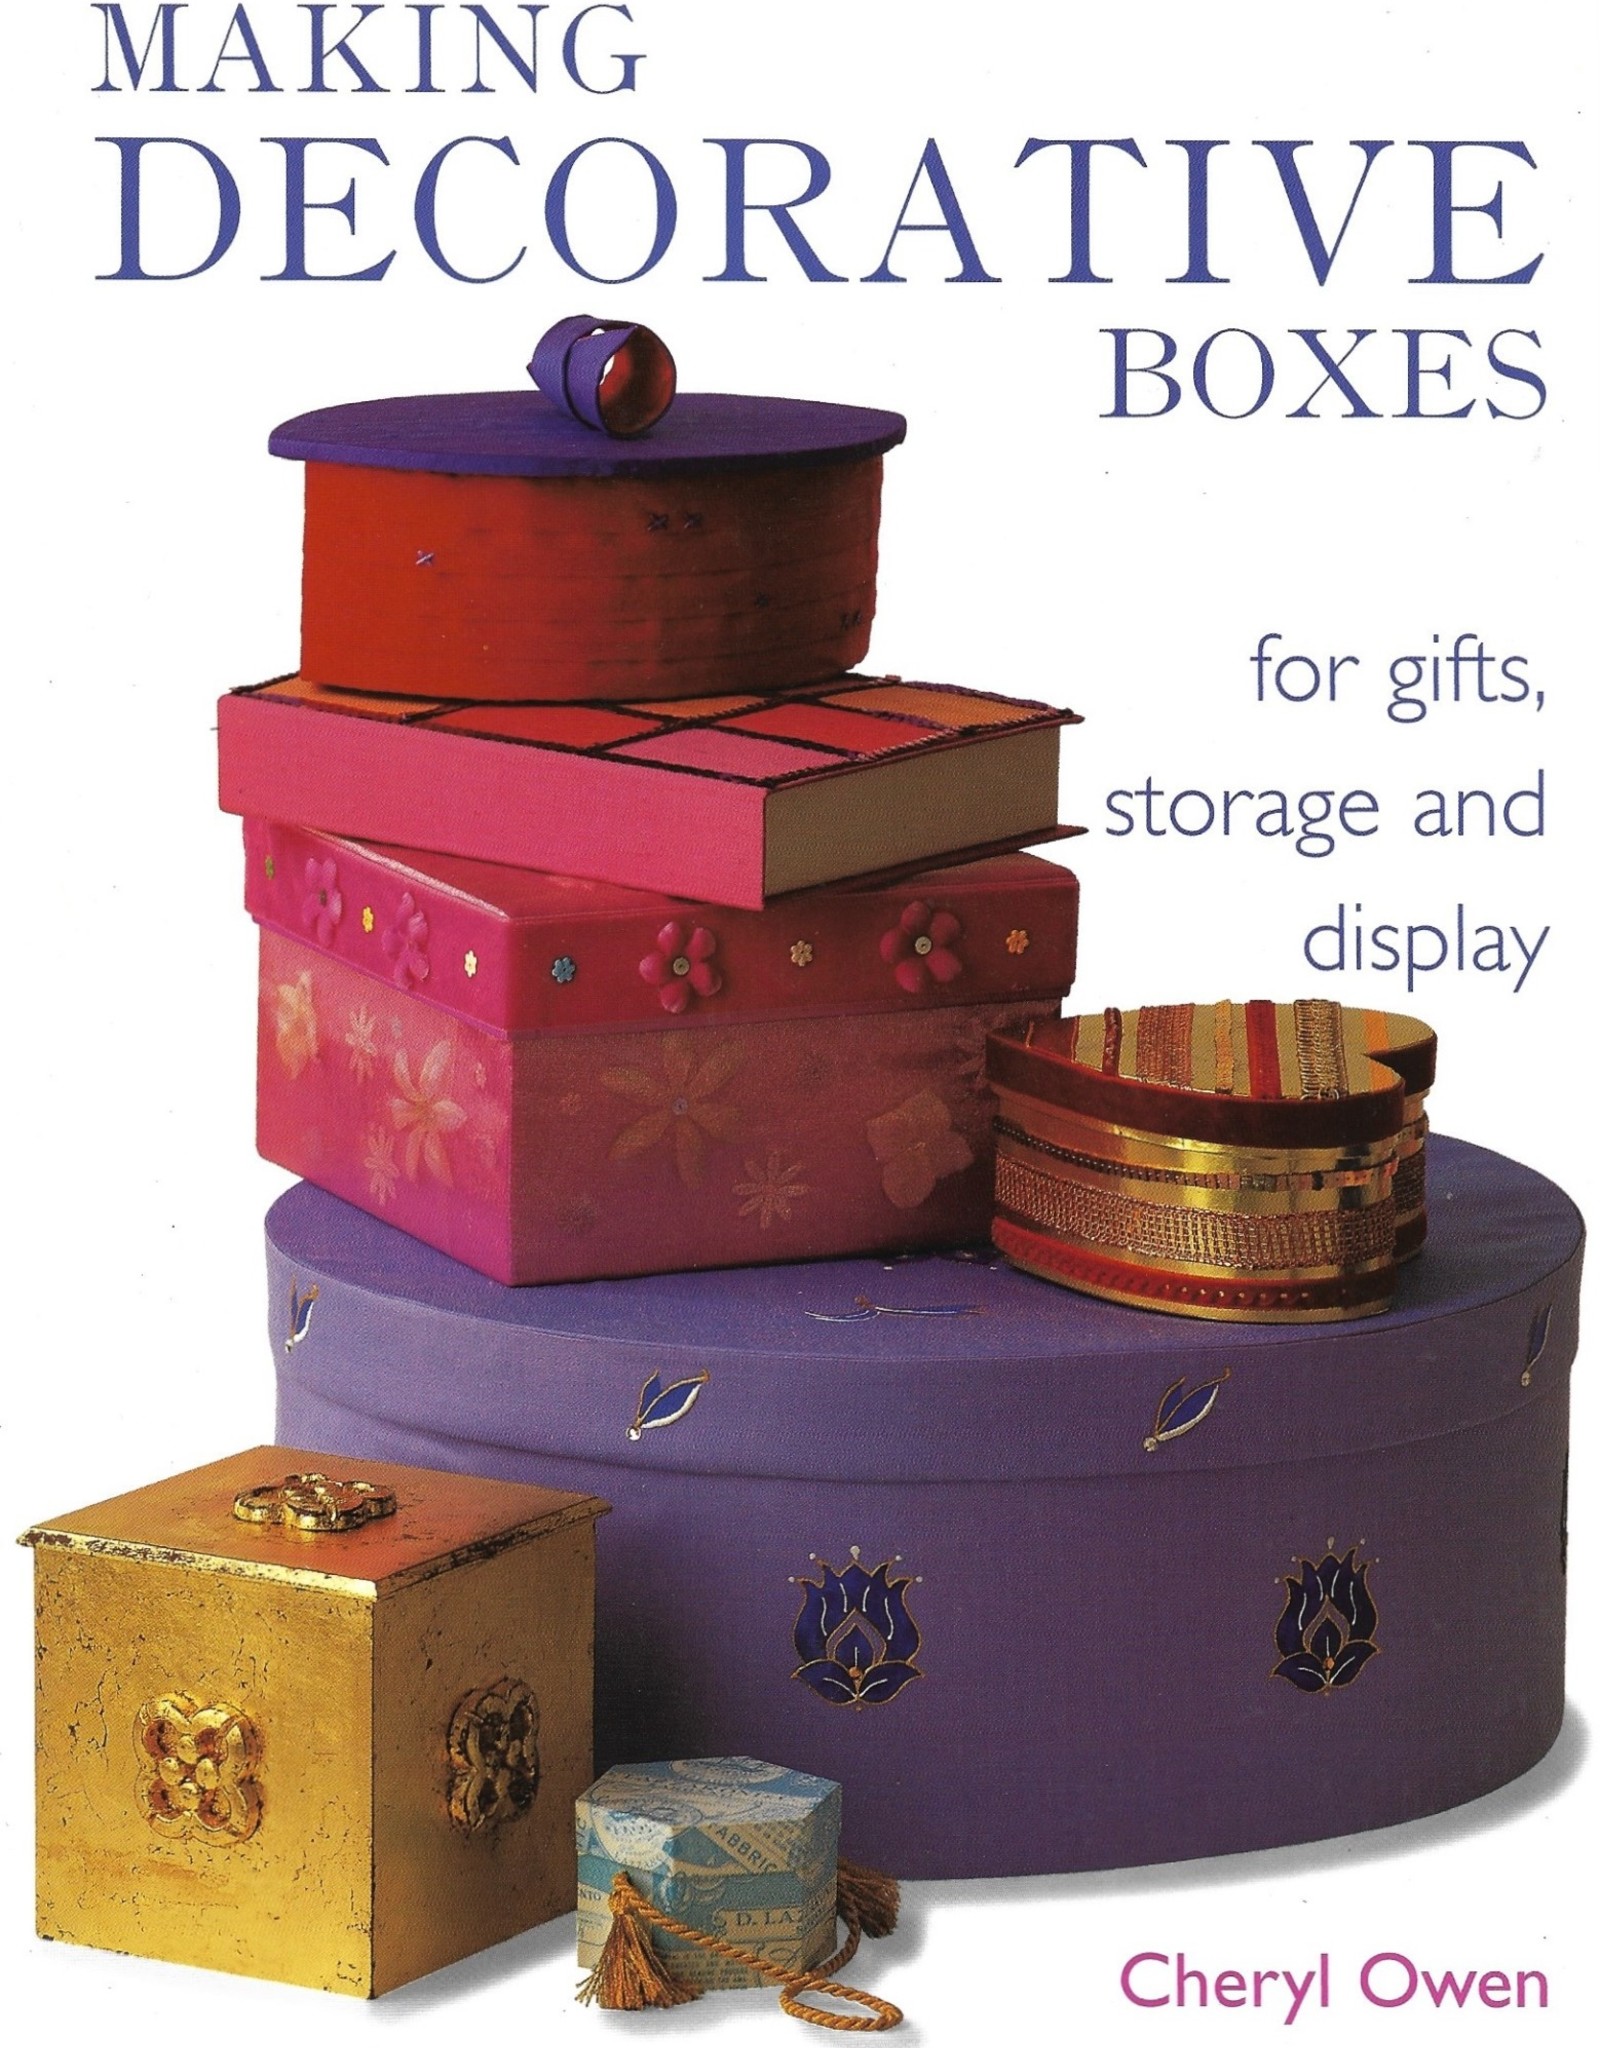 Making Decorative Boxes for Gifts and Display